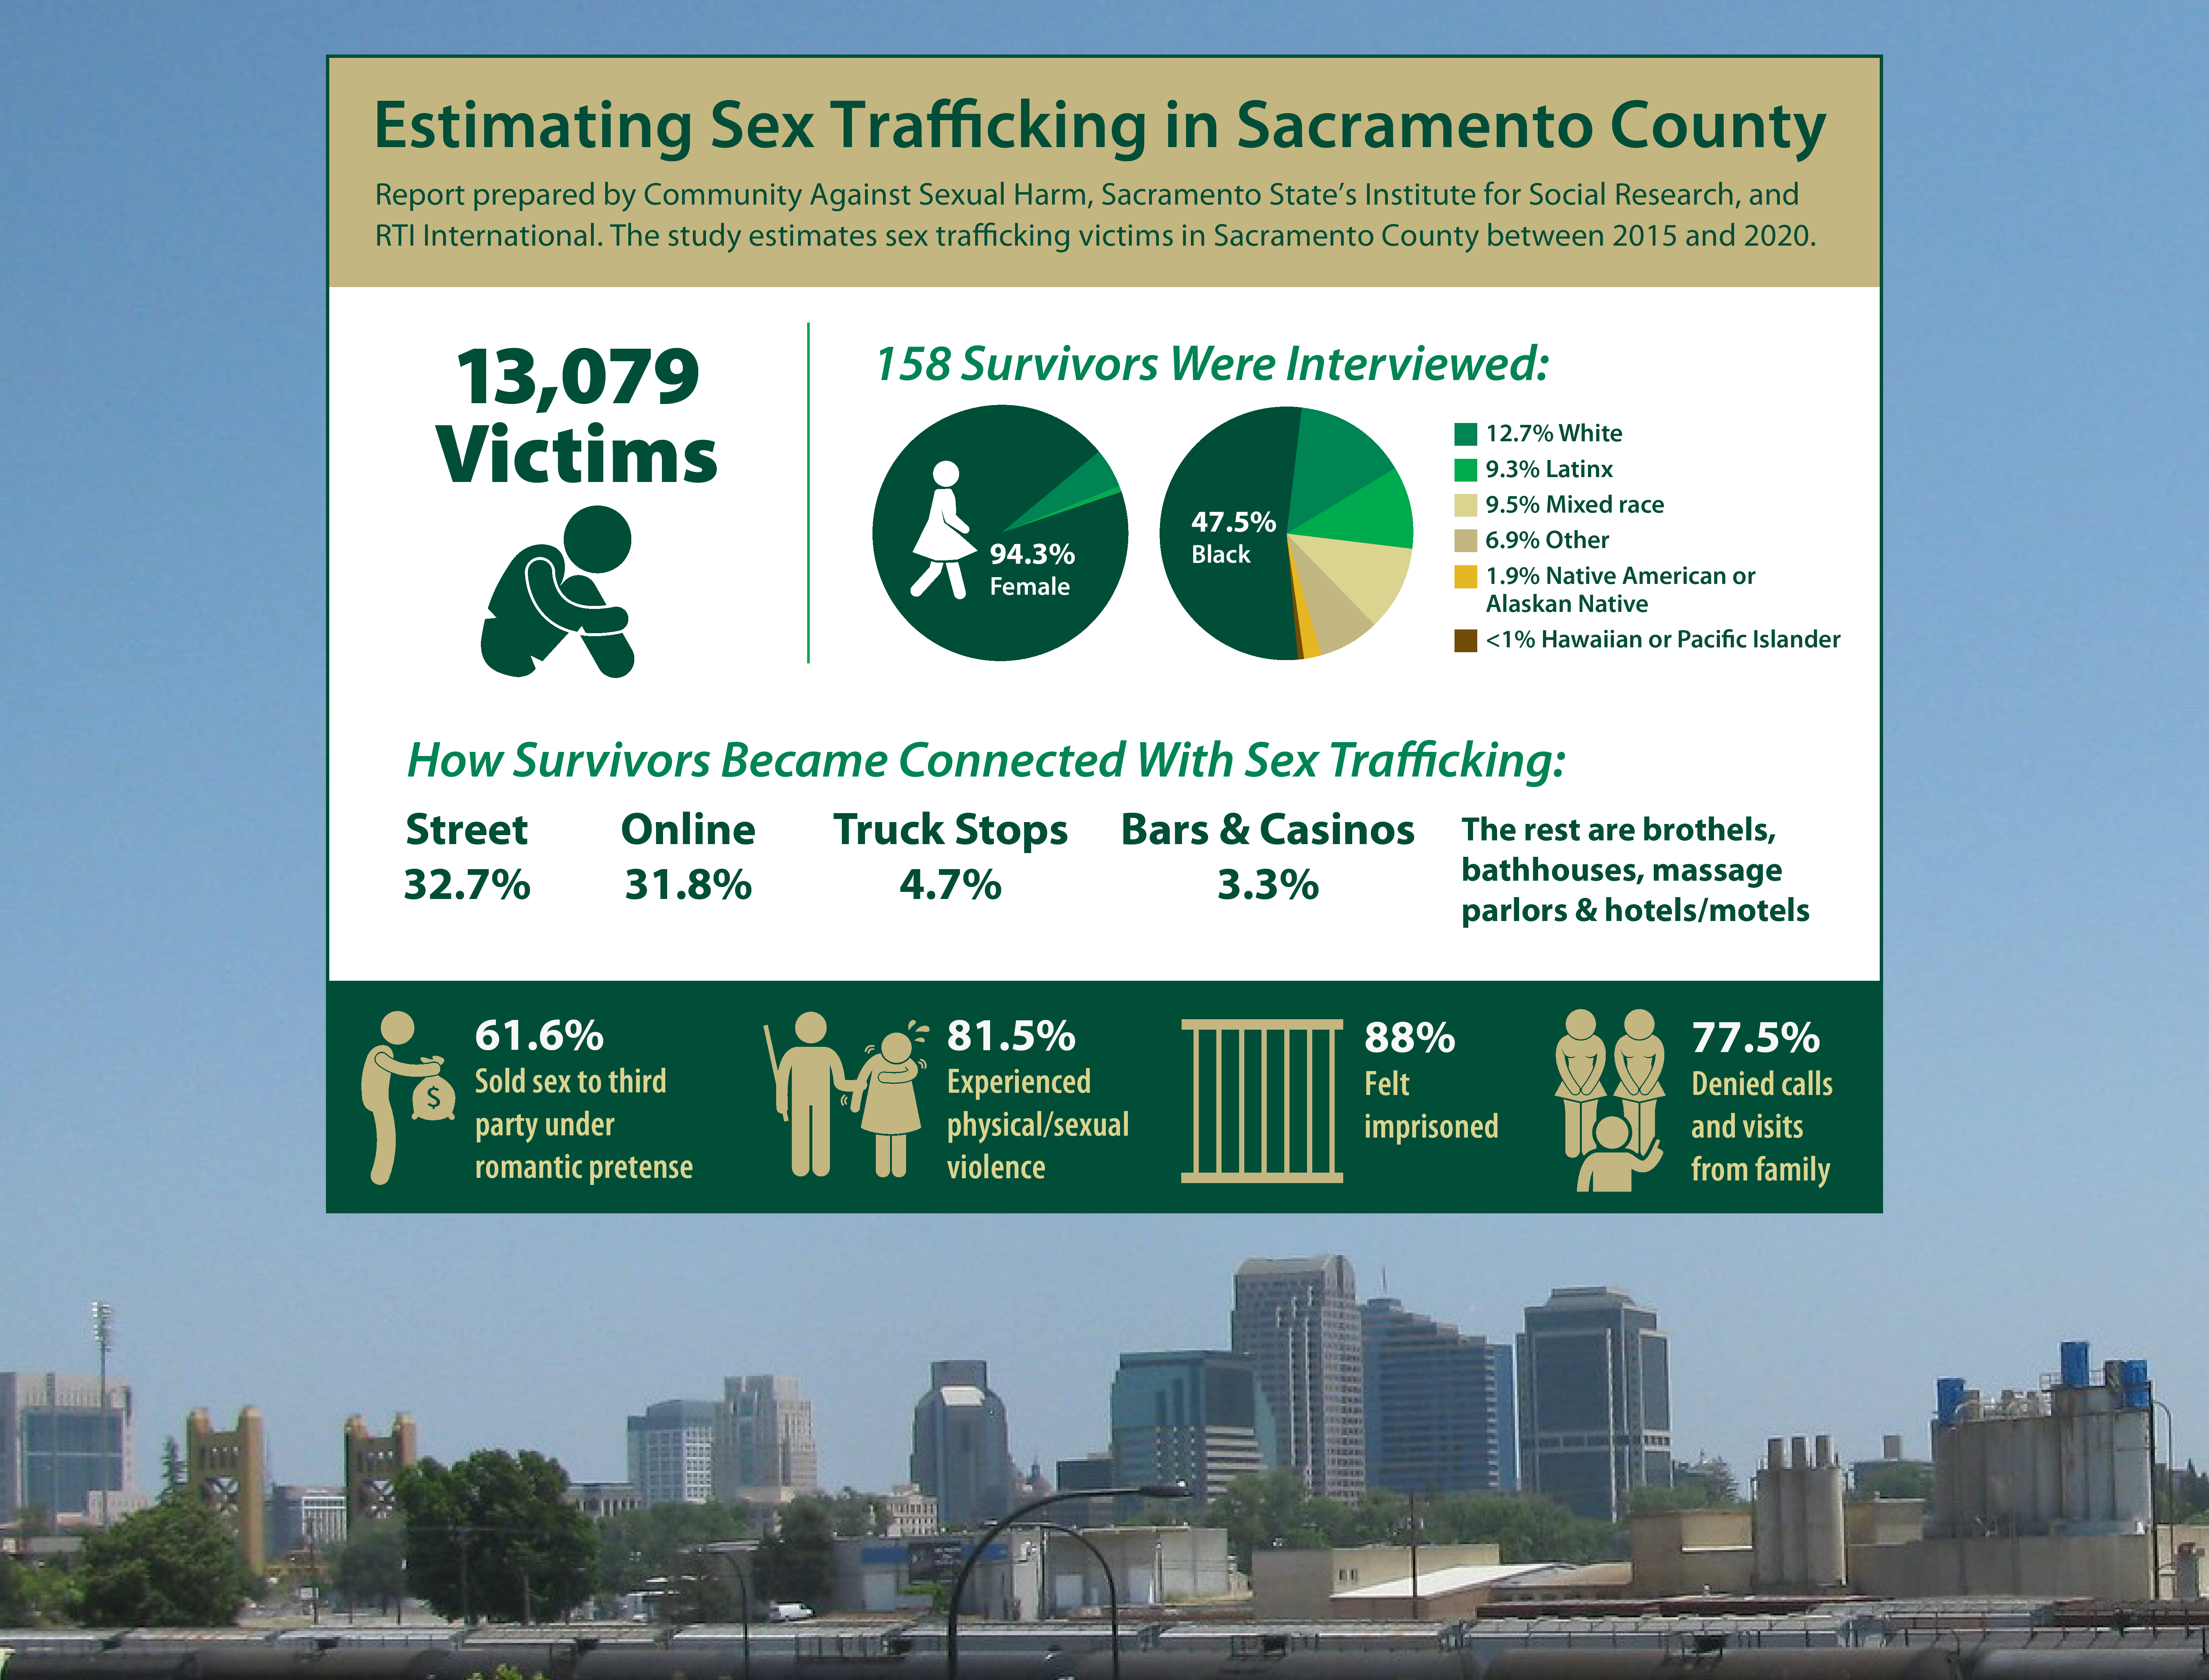 Sac States Institute For Social Research Helps Document Alarming Level Of Sex Trafficking In